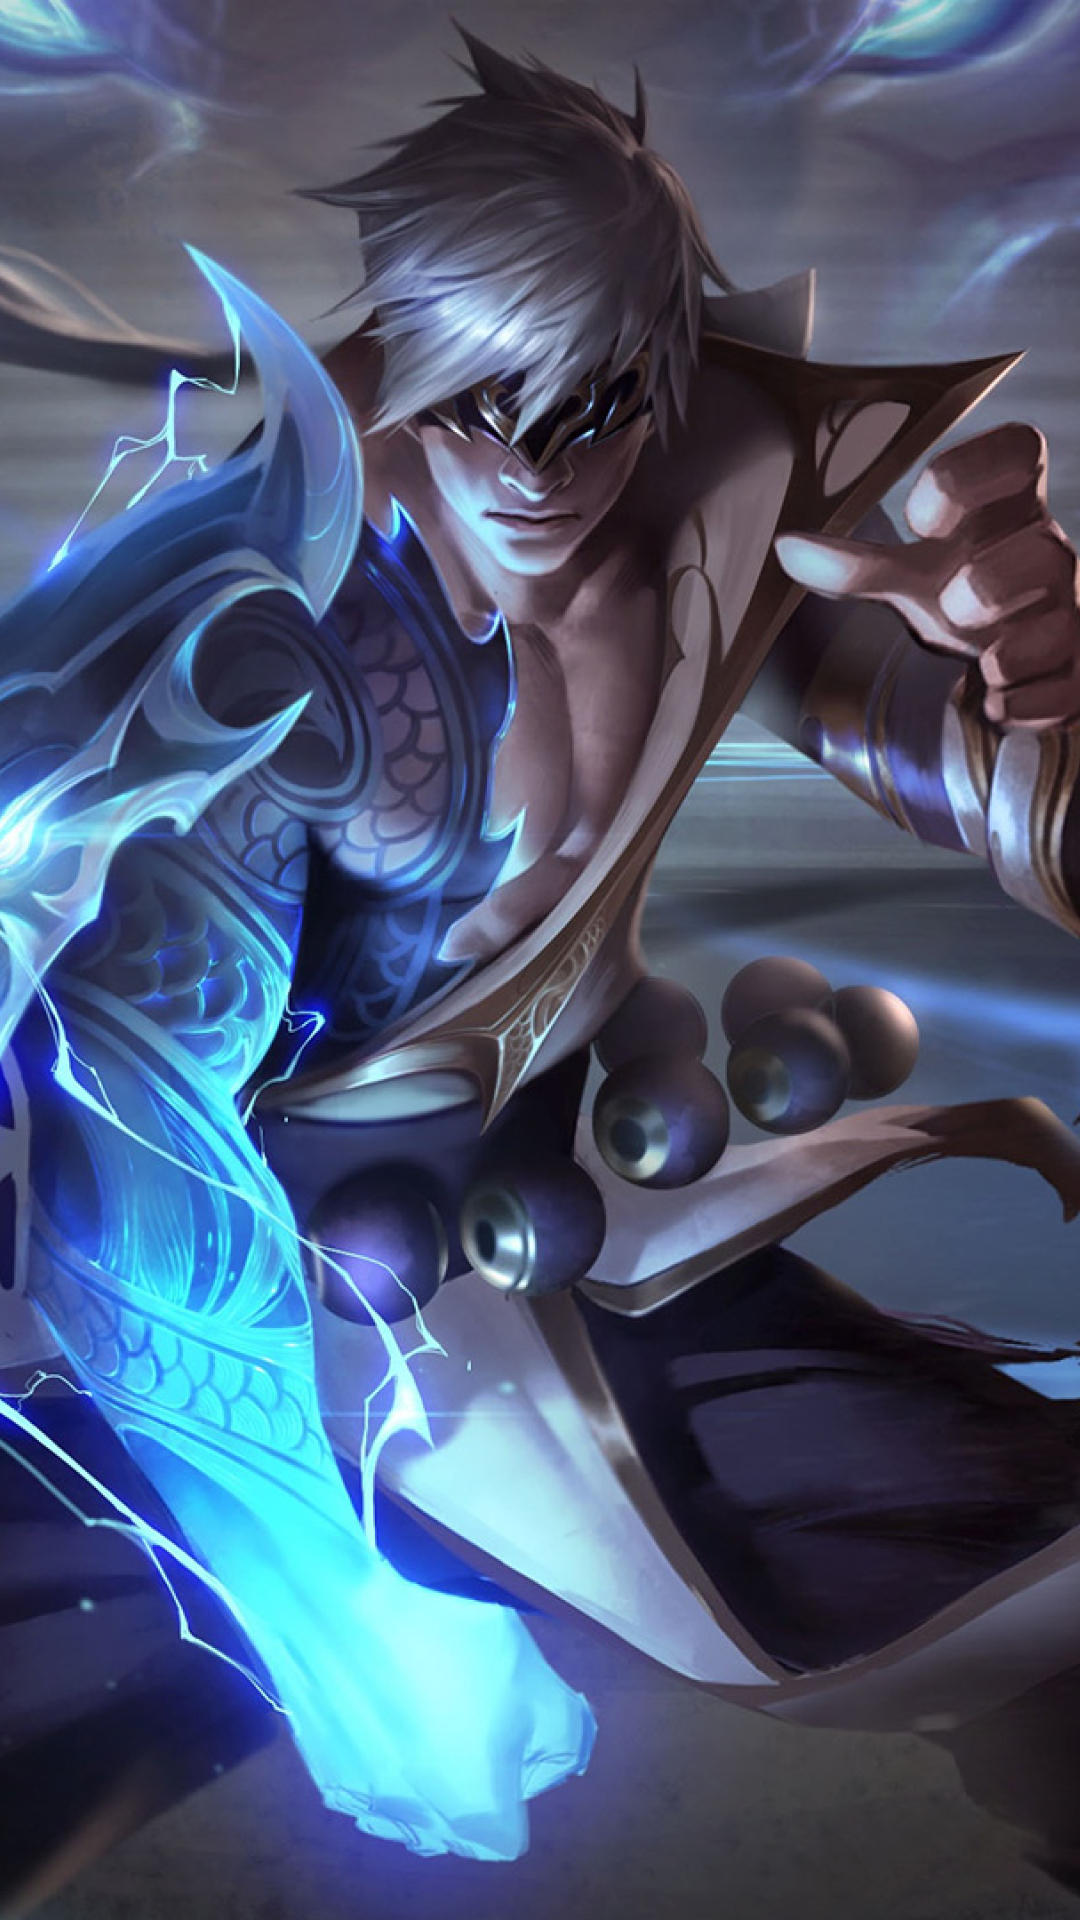 1080x1920 Lee Sin New League Of Legends Iphone 7, 6s, 6 Plus and Pixel